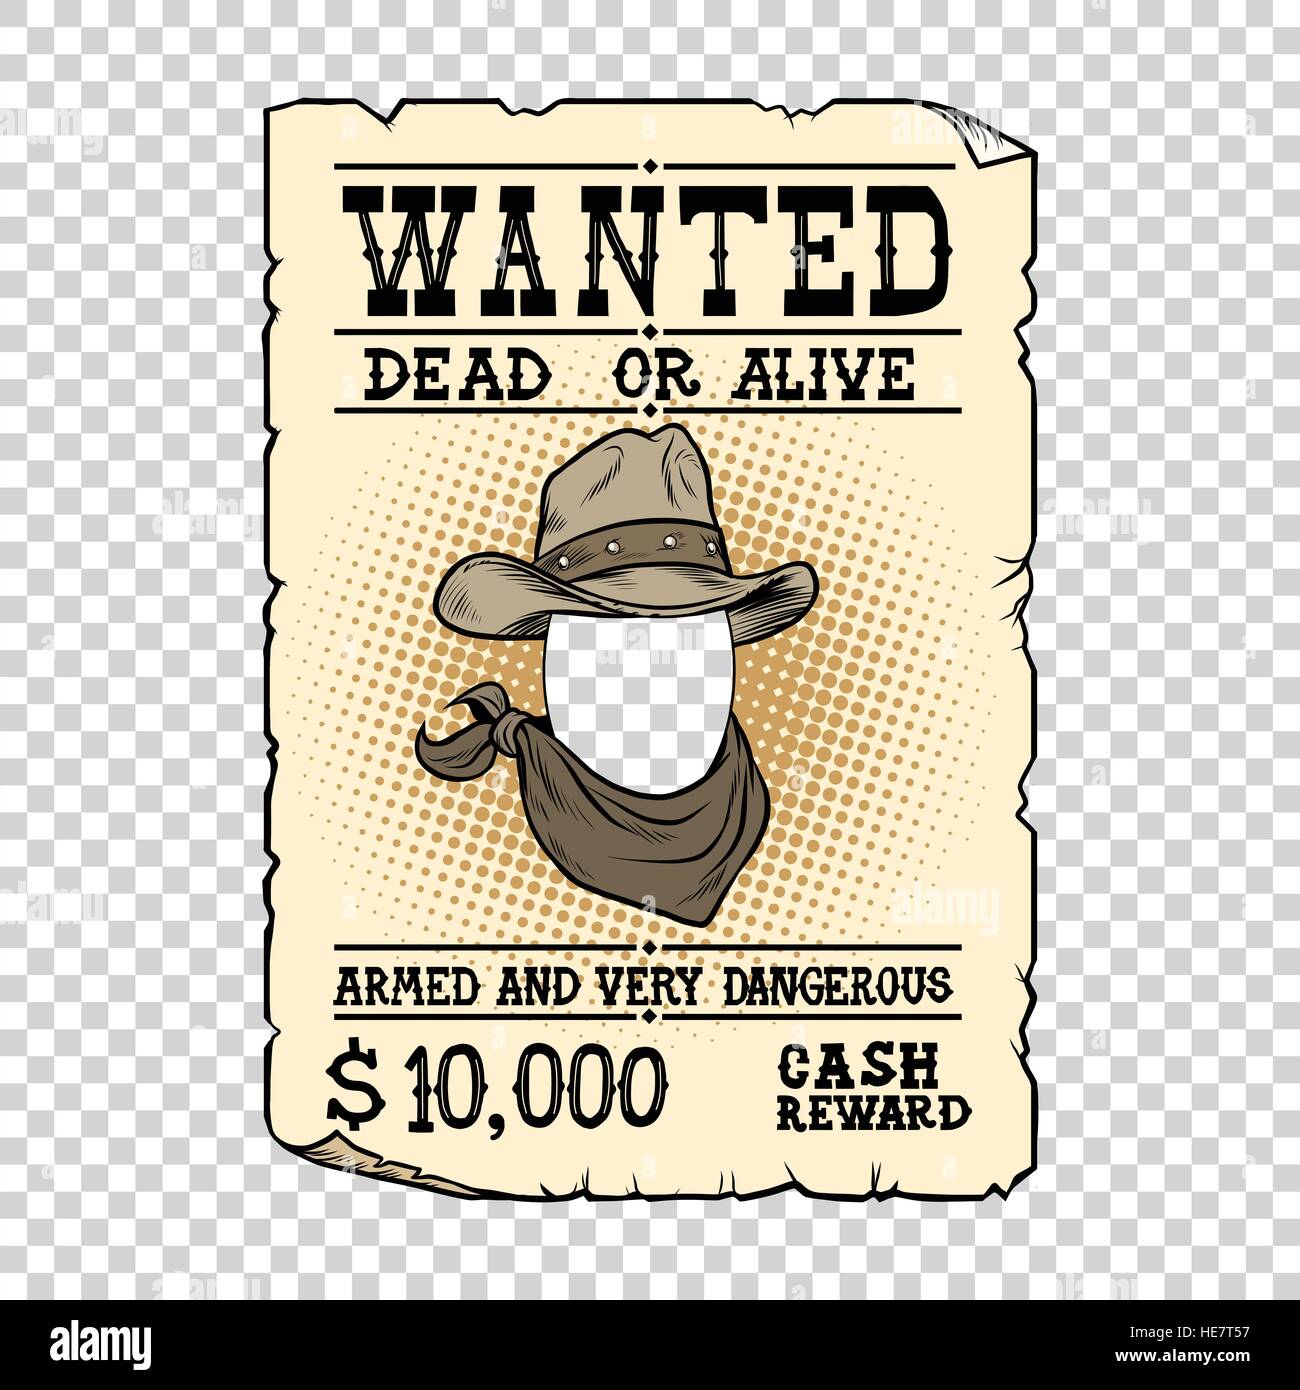 Western ad wanted dead or alive Stock Vector